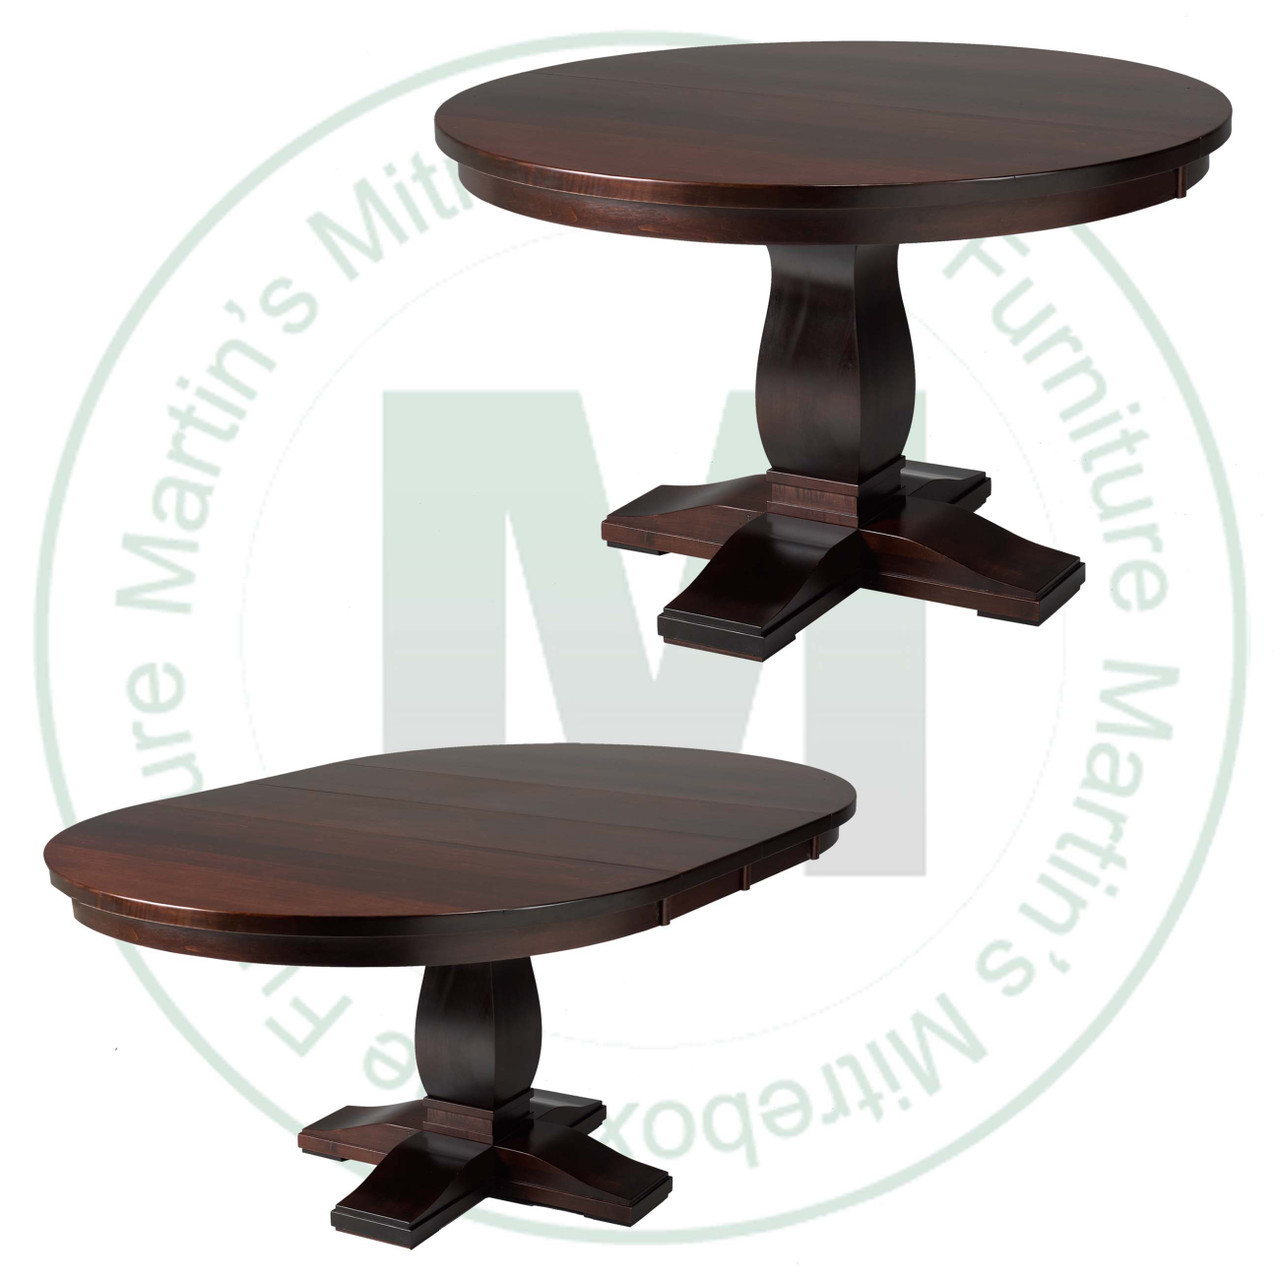 Maple Valencia Single Pedestal Table 42''D x 48''W x 30''H With 2 - 12'' Leaves Table